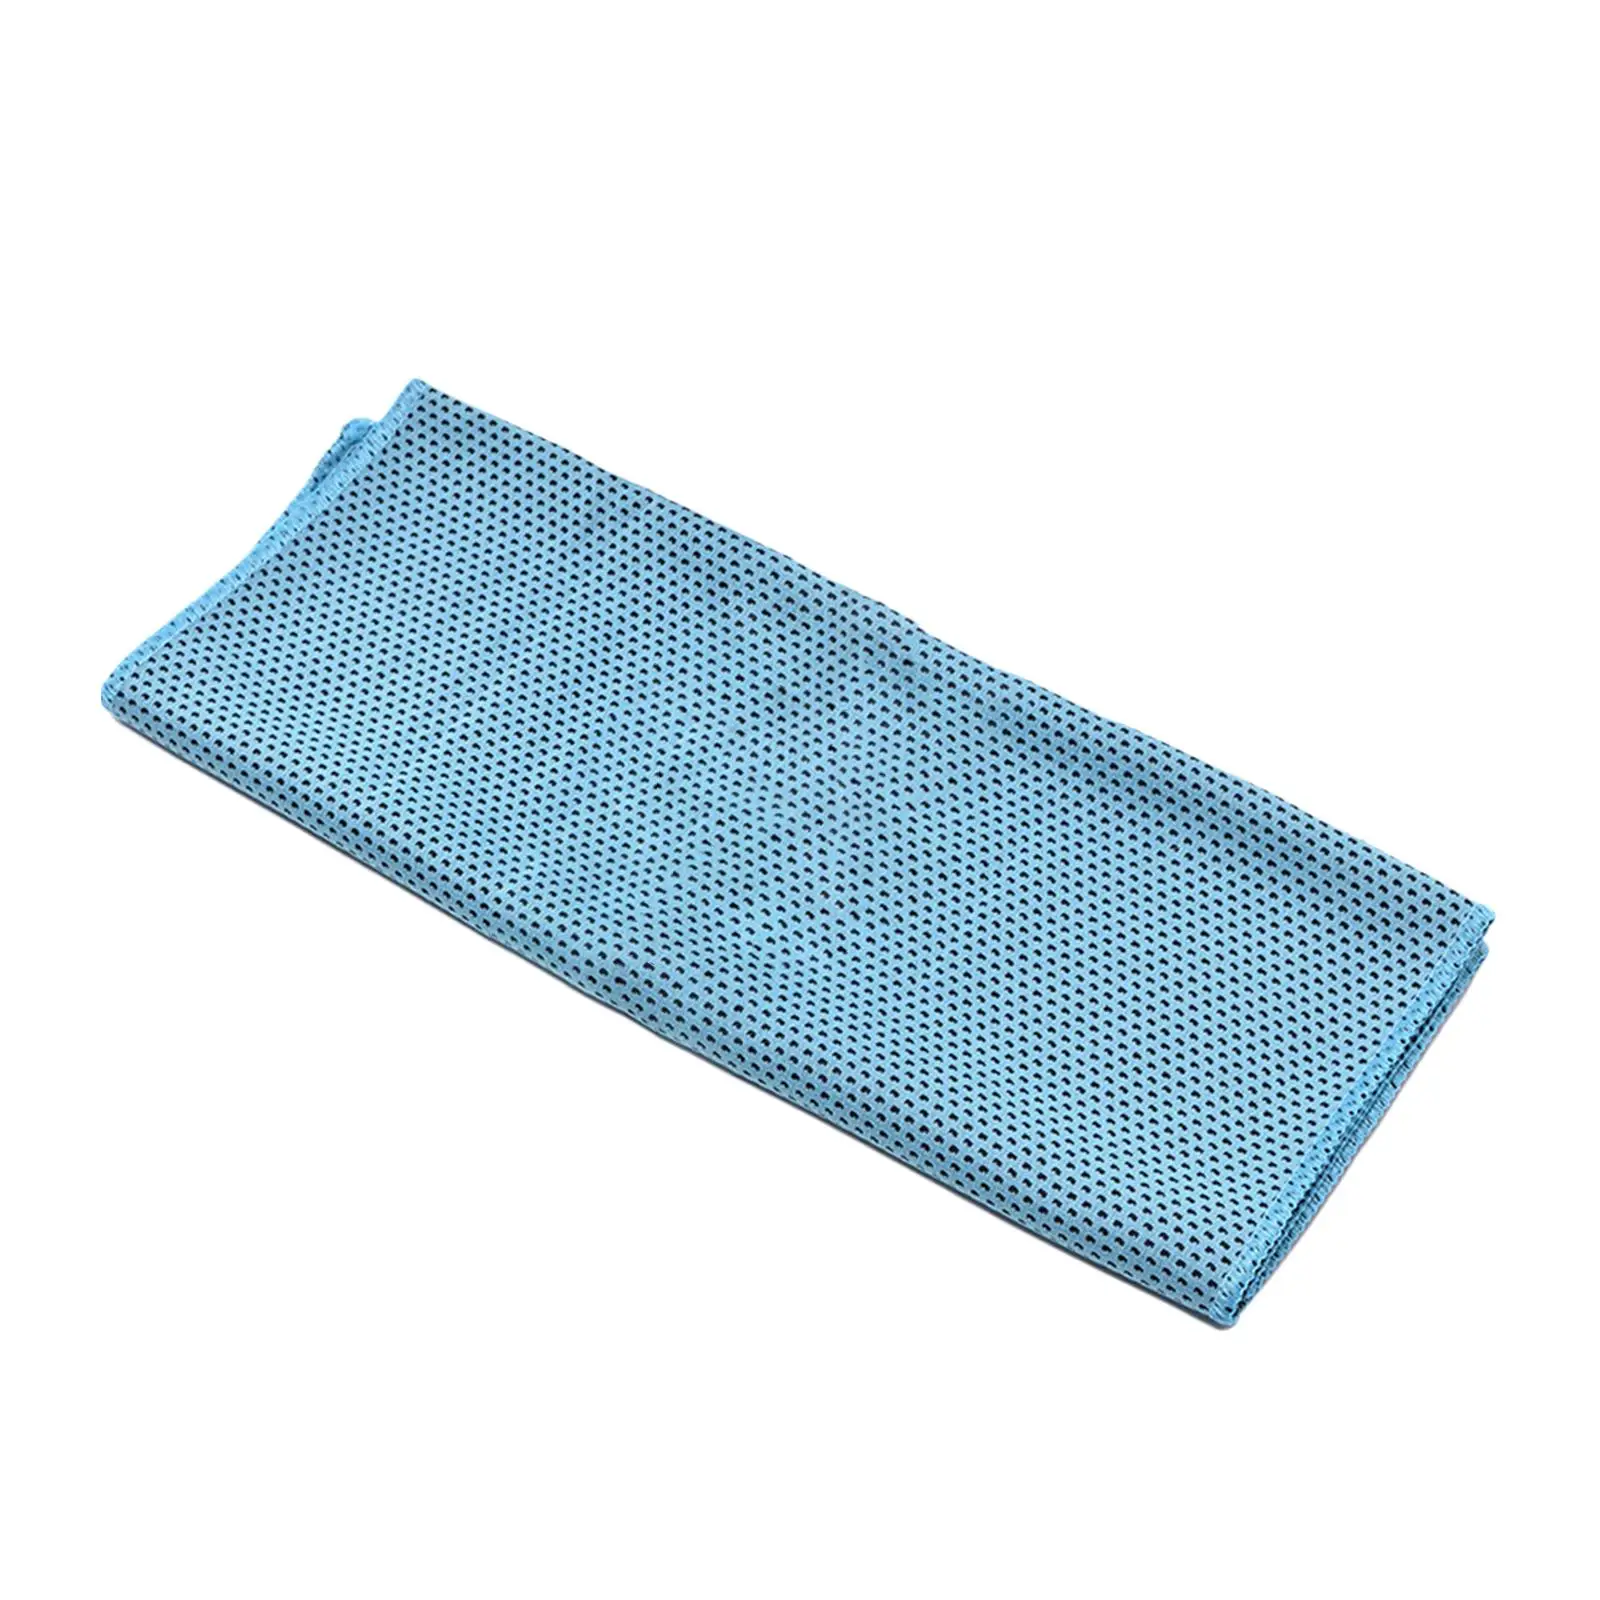 Cooling Towel for Neck and Face Hot Weather Breathable Chilly Towel Gym Towel for Outdoor Activities Hiking Camping Yoga Fitness